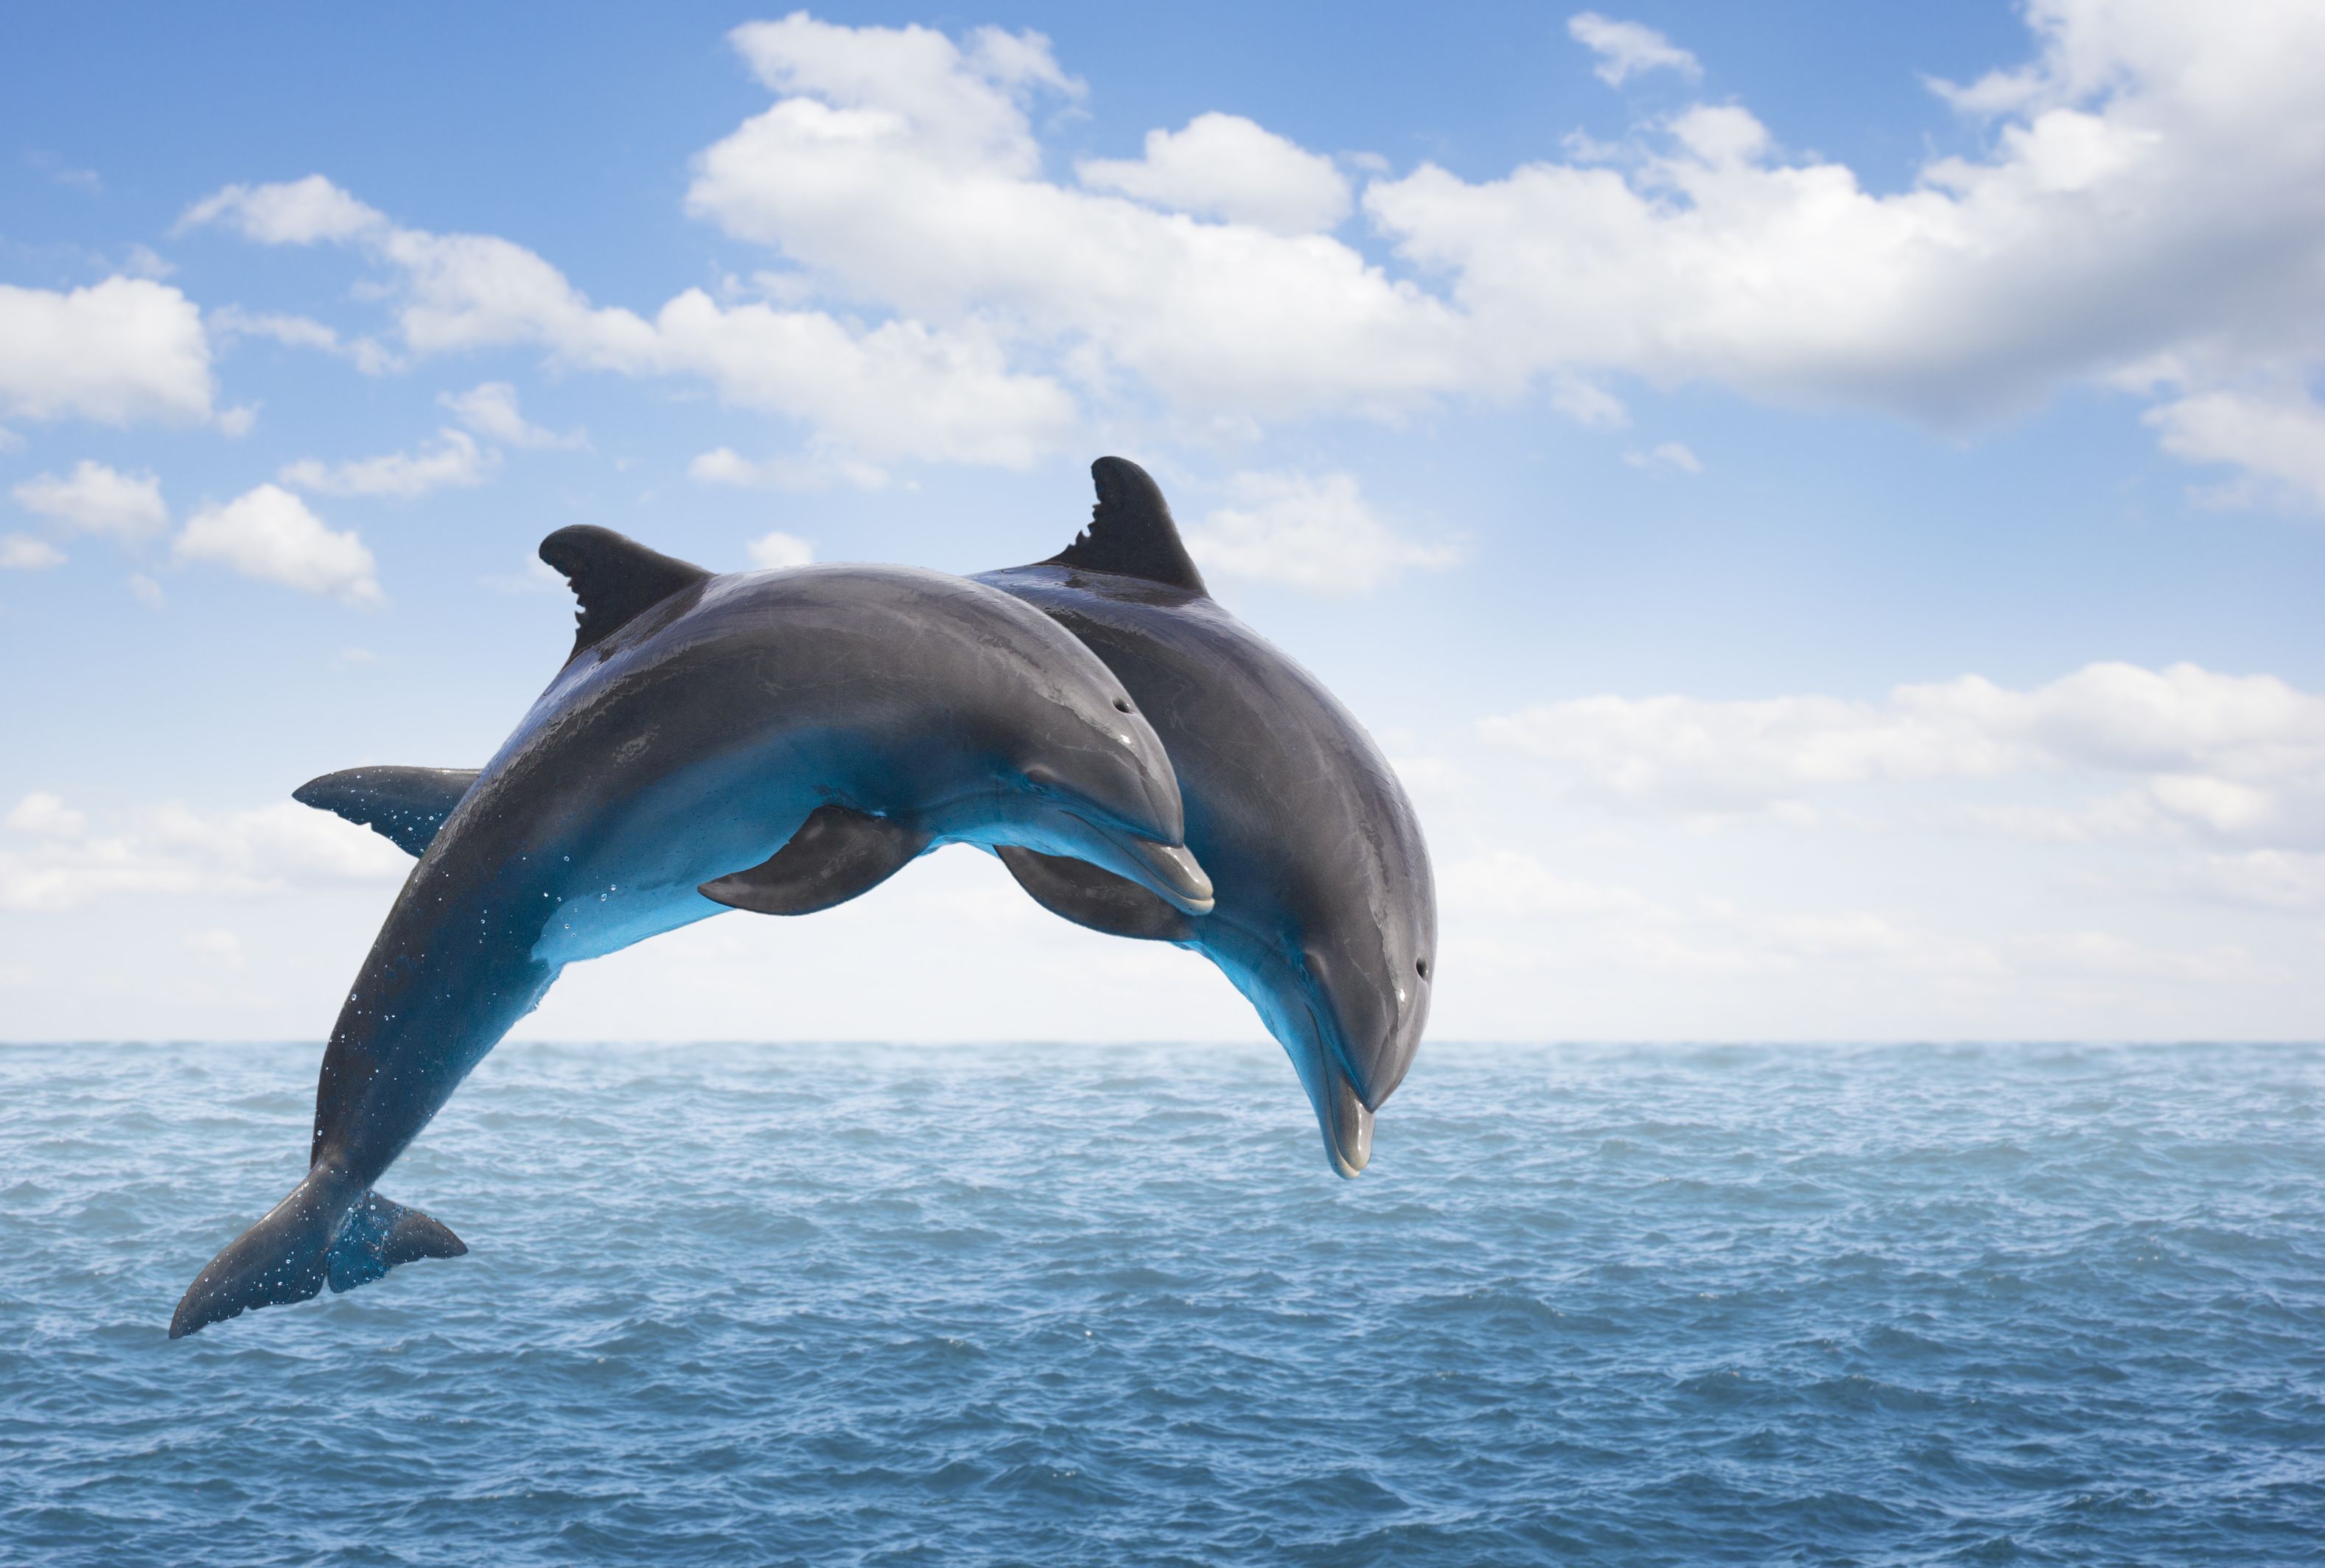 How can we save the dolphins from being endangered